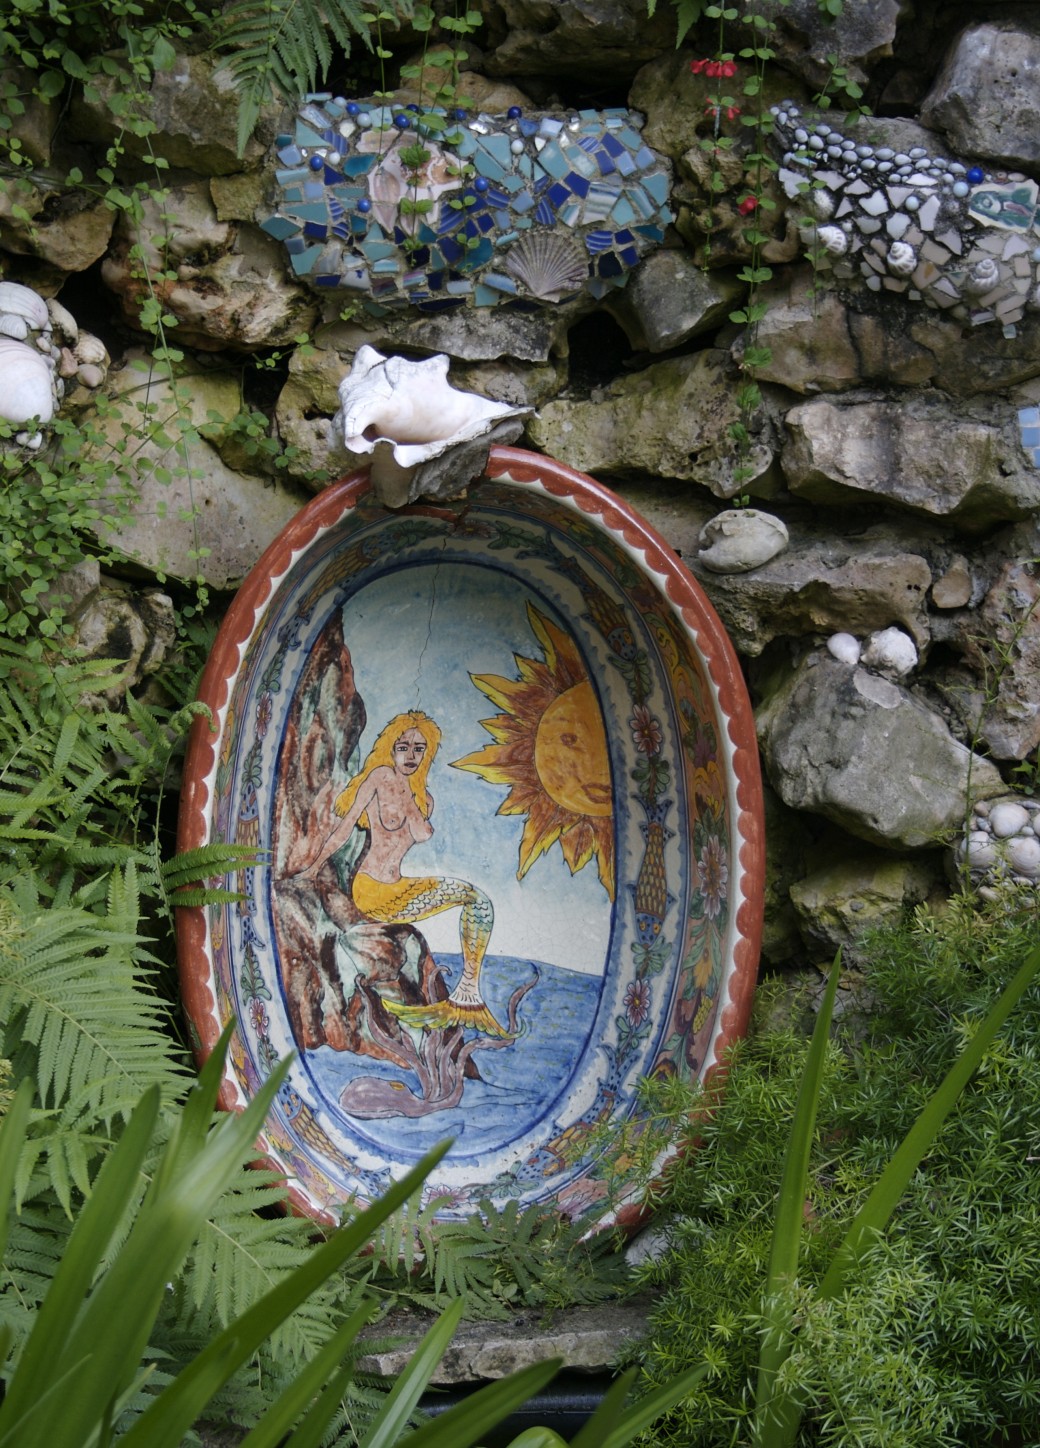 mermaid Mexican painted shrine grotto fishpond